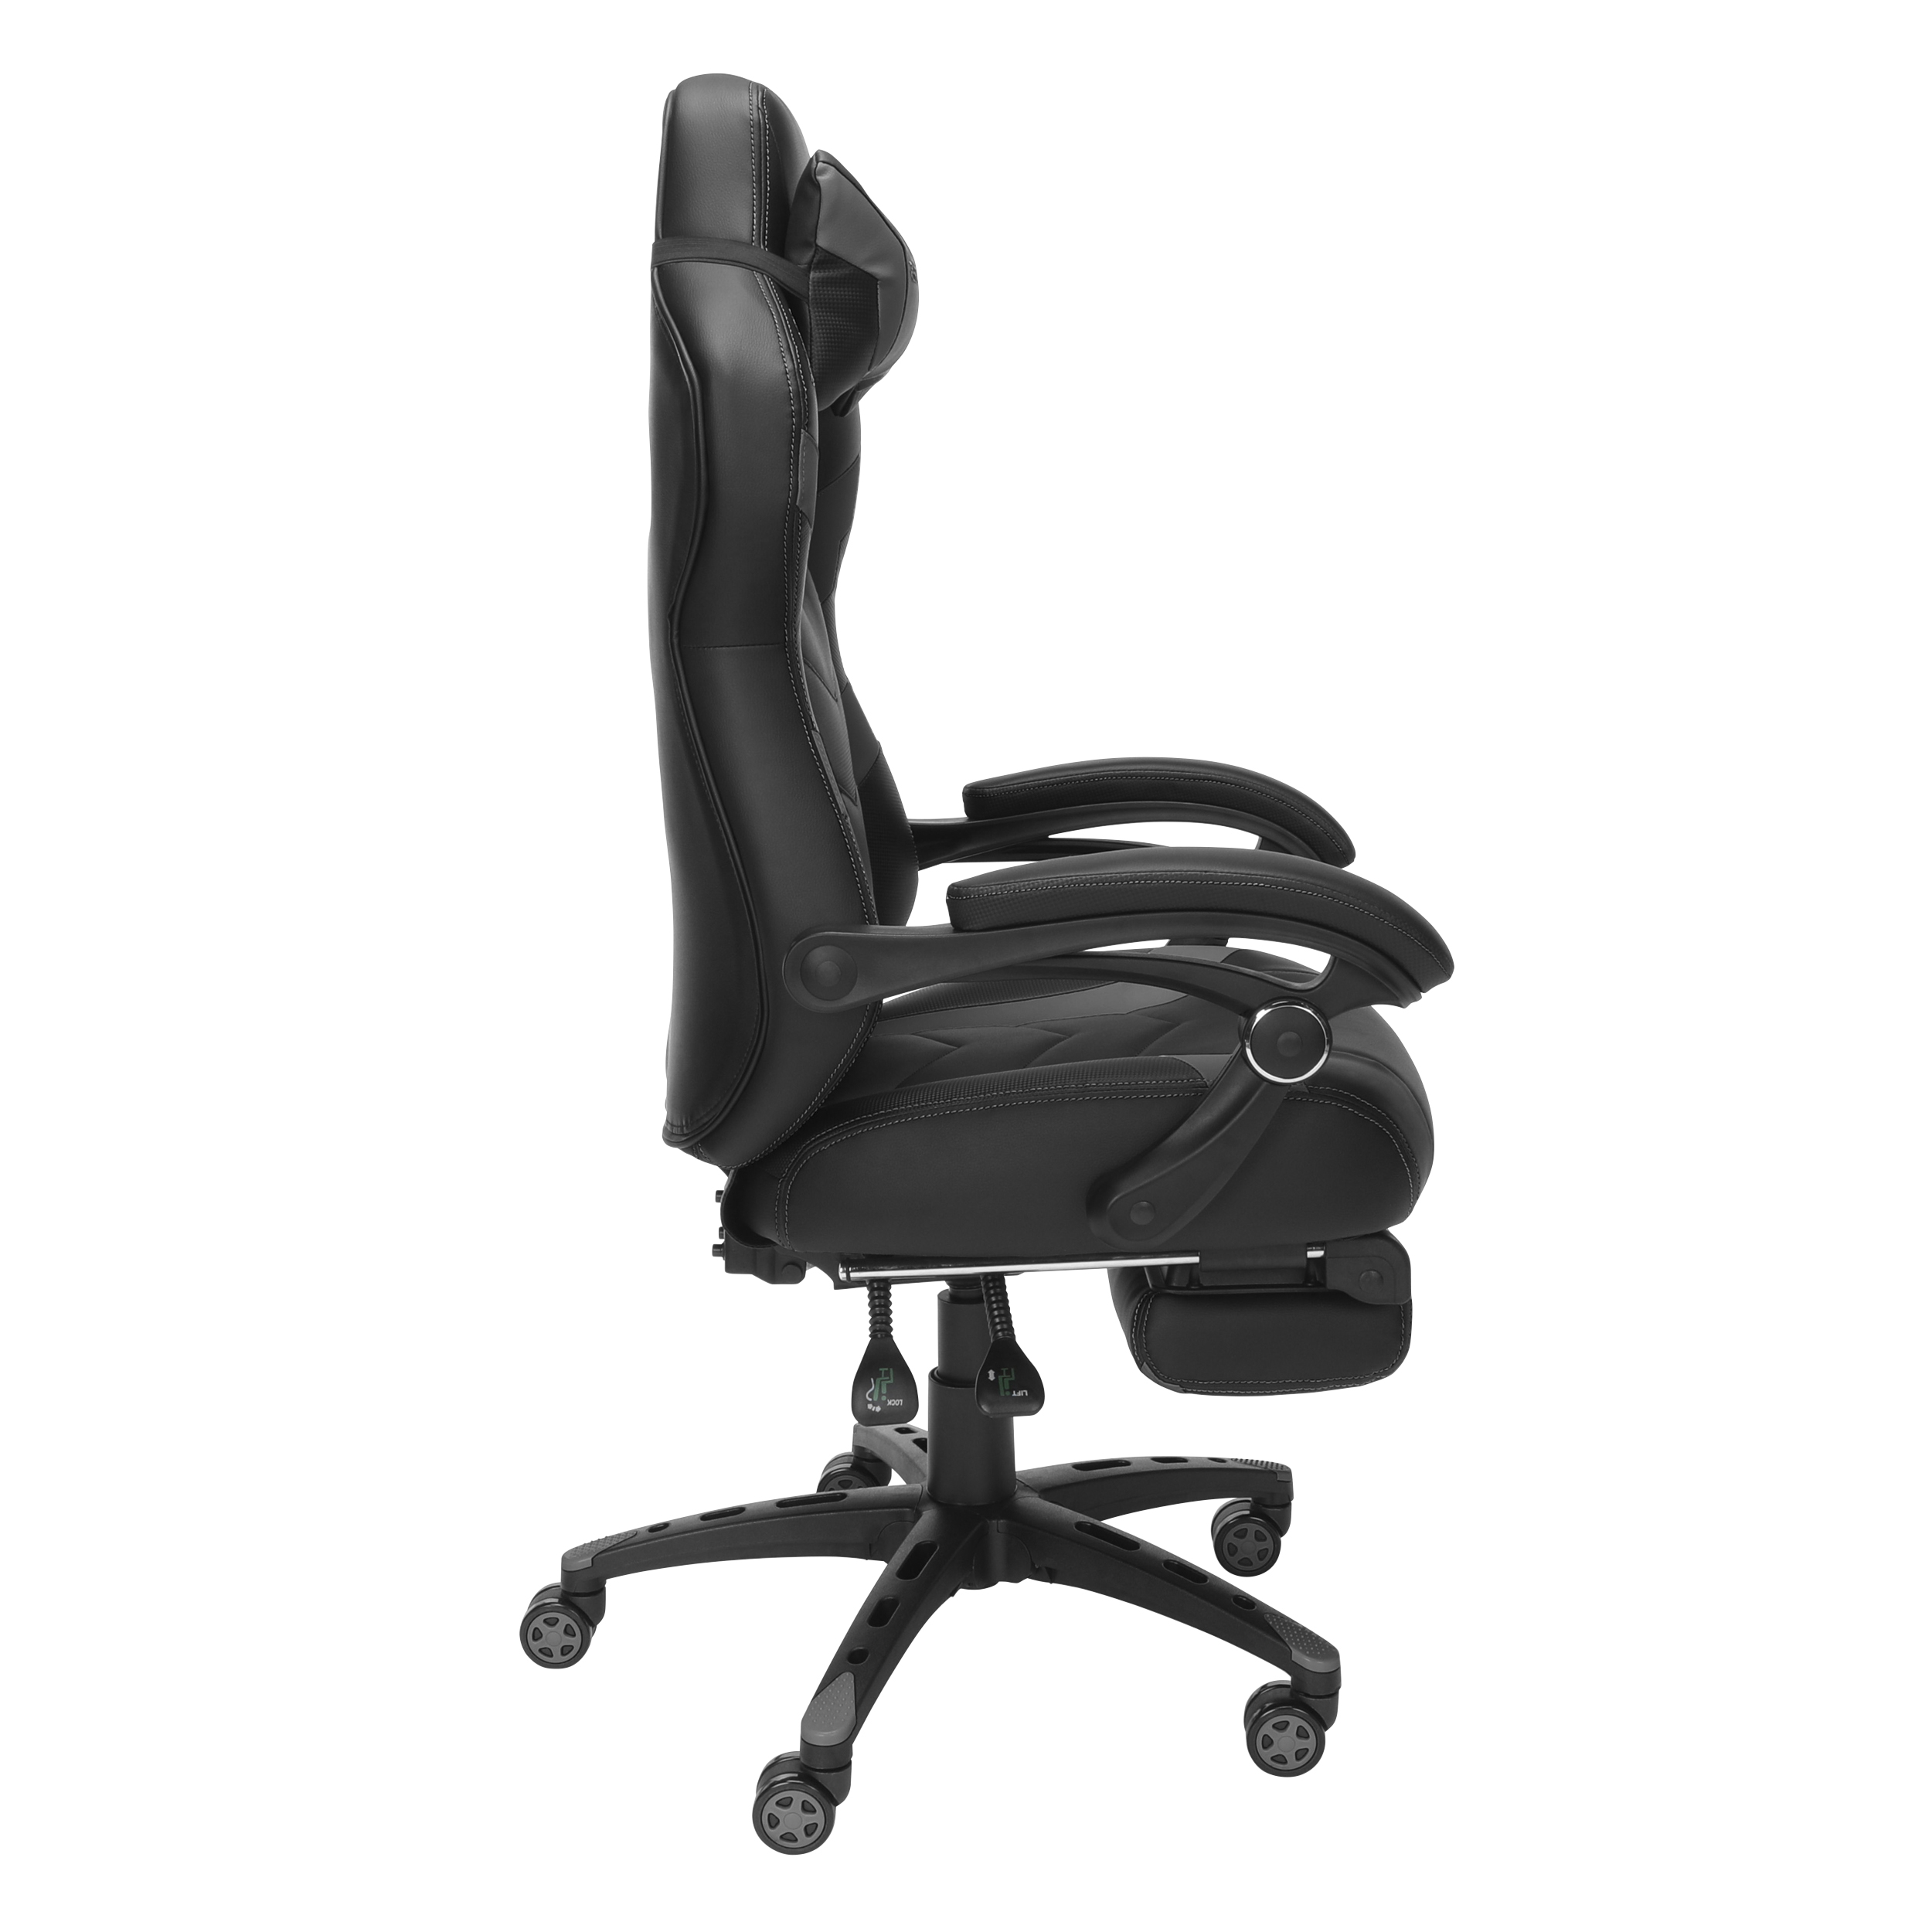 RESPAWN 110 Pro Gaming Chair - Gaming Chair with Footrest, Reclining Gaming Chair, Video Gaming Computer Desk Chair, Adjustable Desk Chair, Gaming Chairs For Adults With Headrest Pillow - Grey - image 4 of 10